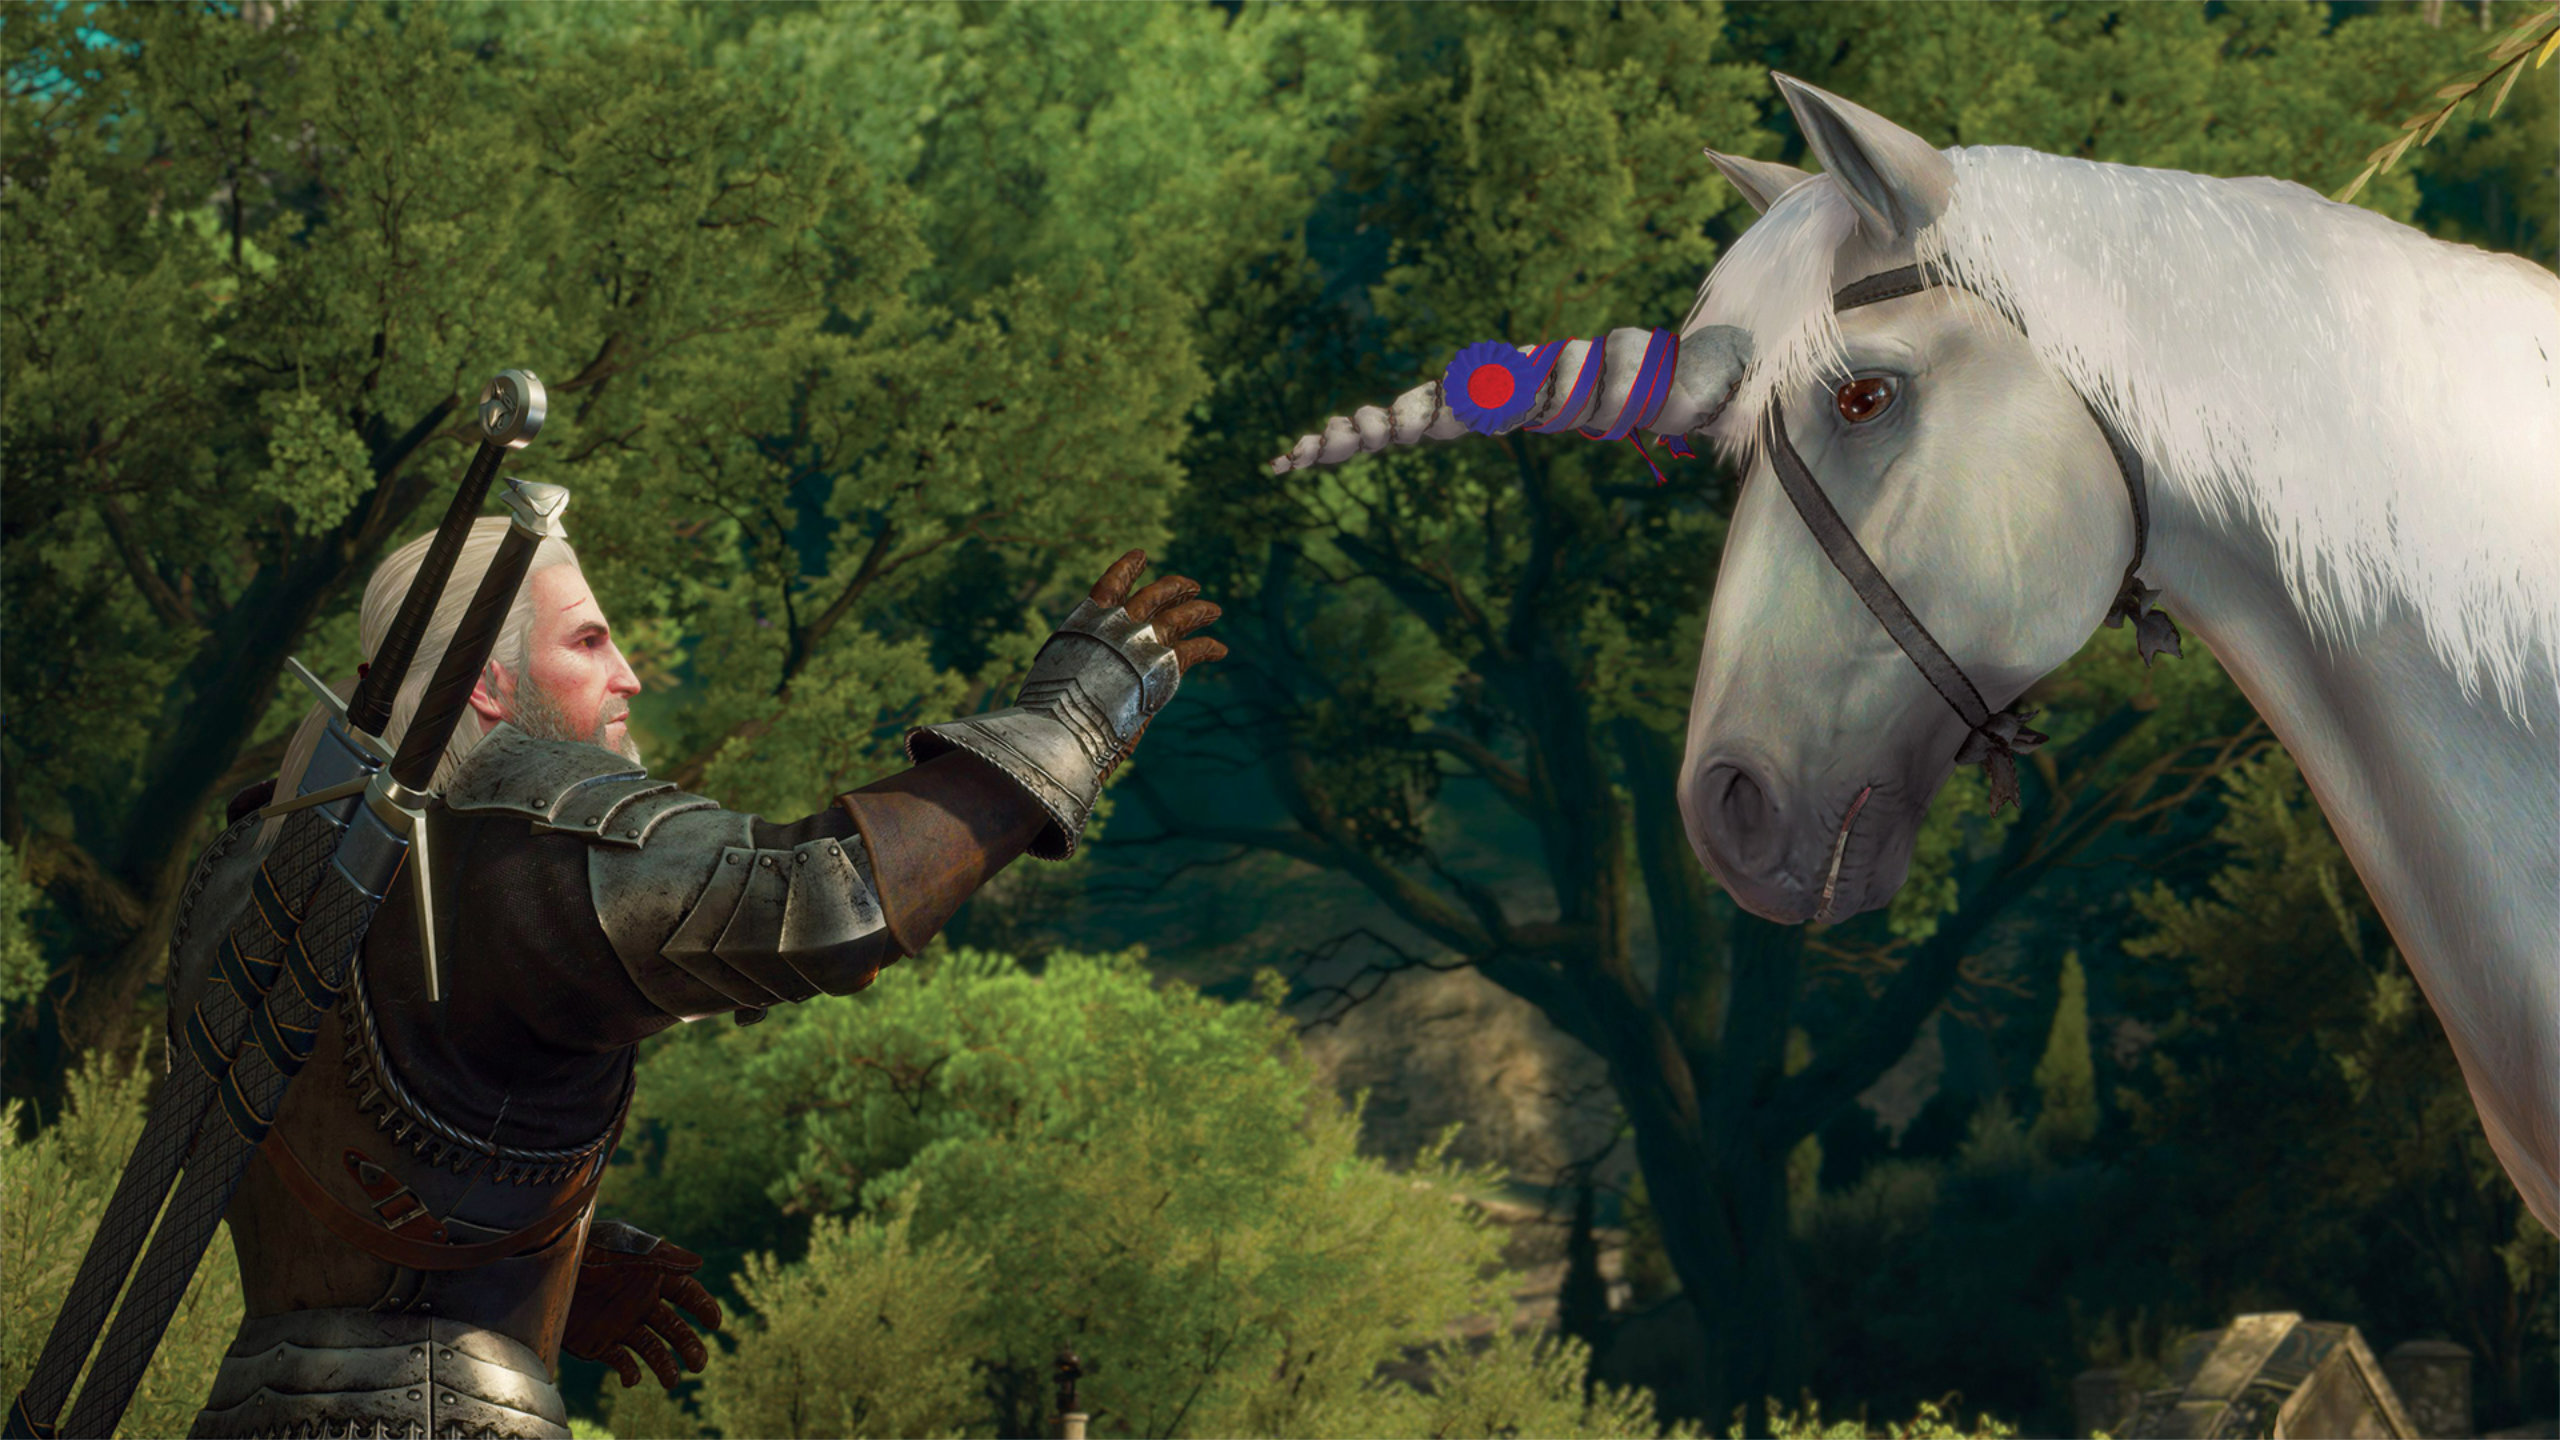 Screenshot of The Witcher 3: Wild Hunt - Blood and Wine expansion